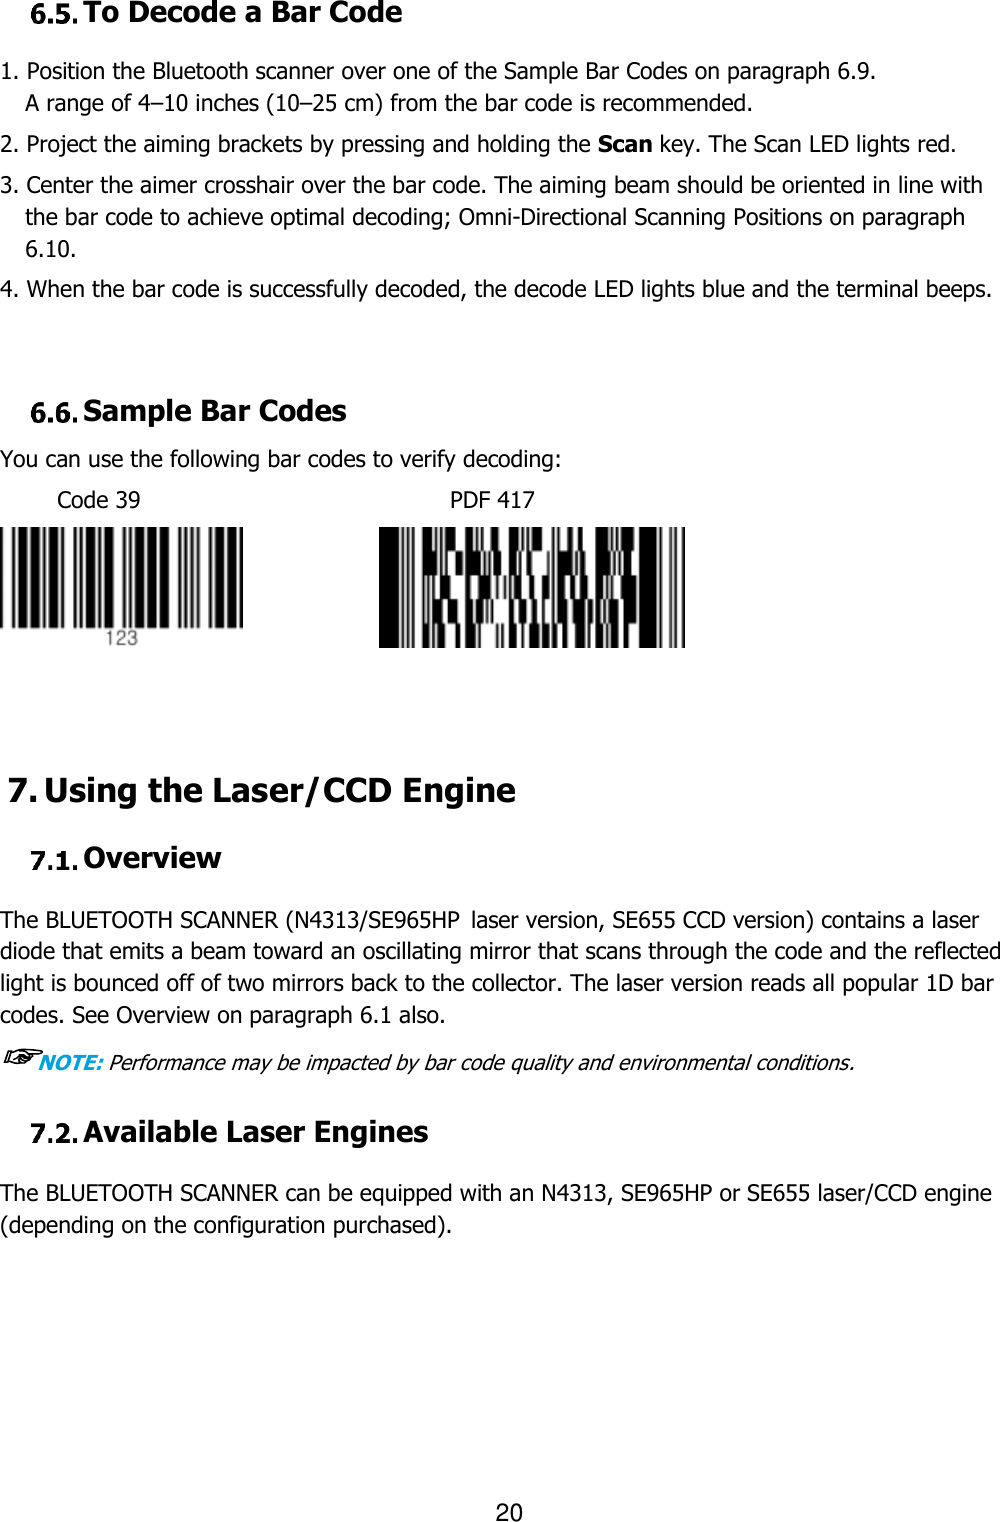                                                                    20   To Decode a Bar Code  1. Position the Bluetooth scanner over one of the Sample Bar Codes on paragraph 6.9. A range of 4–10 inches (10–25 cm) from the bar code is recommended.  2. Project the aiming brackets by pressing and holding the Scan key. The Scan LED lights red. 3. Center the aimer crosshair over the bar code. The aiming beam should be oriented in line with the bar code to achieve optimal decoding; Omni-Directional Scanning Positions on paragraph 6.10.  4. When the bar code is successfully decoded, the decode LED lights blue and the terminal beeps.    Sample Bar Codes You can use the following bar codes to verify decoding: Code 39                           PDF 417                 7. Using the Laser/CCD Engine   Overview  The BLUETOOTH SCANNER (N4313/SE965HP laser version, SE655 CCD version) contains a laser diode that emits a beam toward an oscillating mirror that scans through the code and the reflected light is bounced off of two mirrors back to the collector. The laser version reads all popular 1D bar codes. See Overview on paragraph 6.1 also. ☞NOTE: Performance may be impacted by bar code quality and environmental conditions.   Available Laser Engines  The BLUETOOTH SCANNER can be equipped with an N4313, SE965HP or SE655 laser/CCD engine (depending on the configuration purchased).         